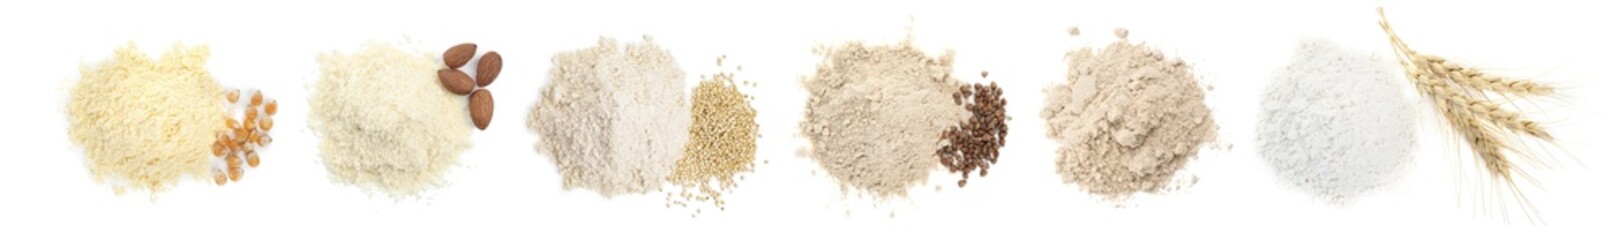 Different types of flour and ingredients on white background, top view. Collage design